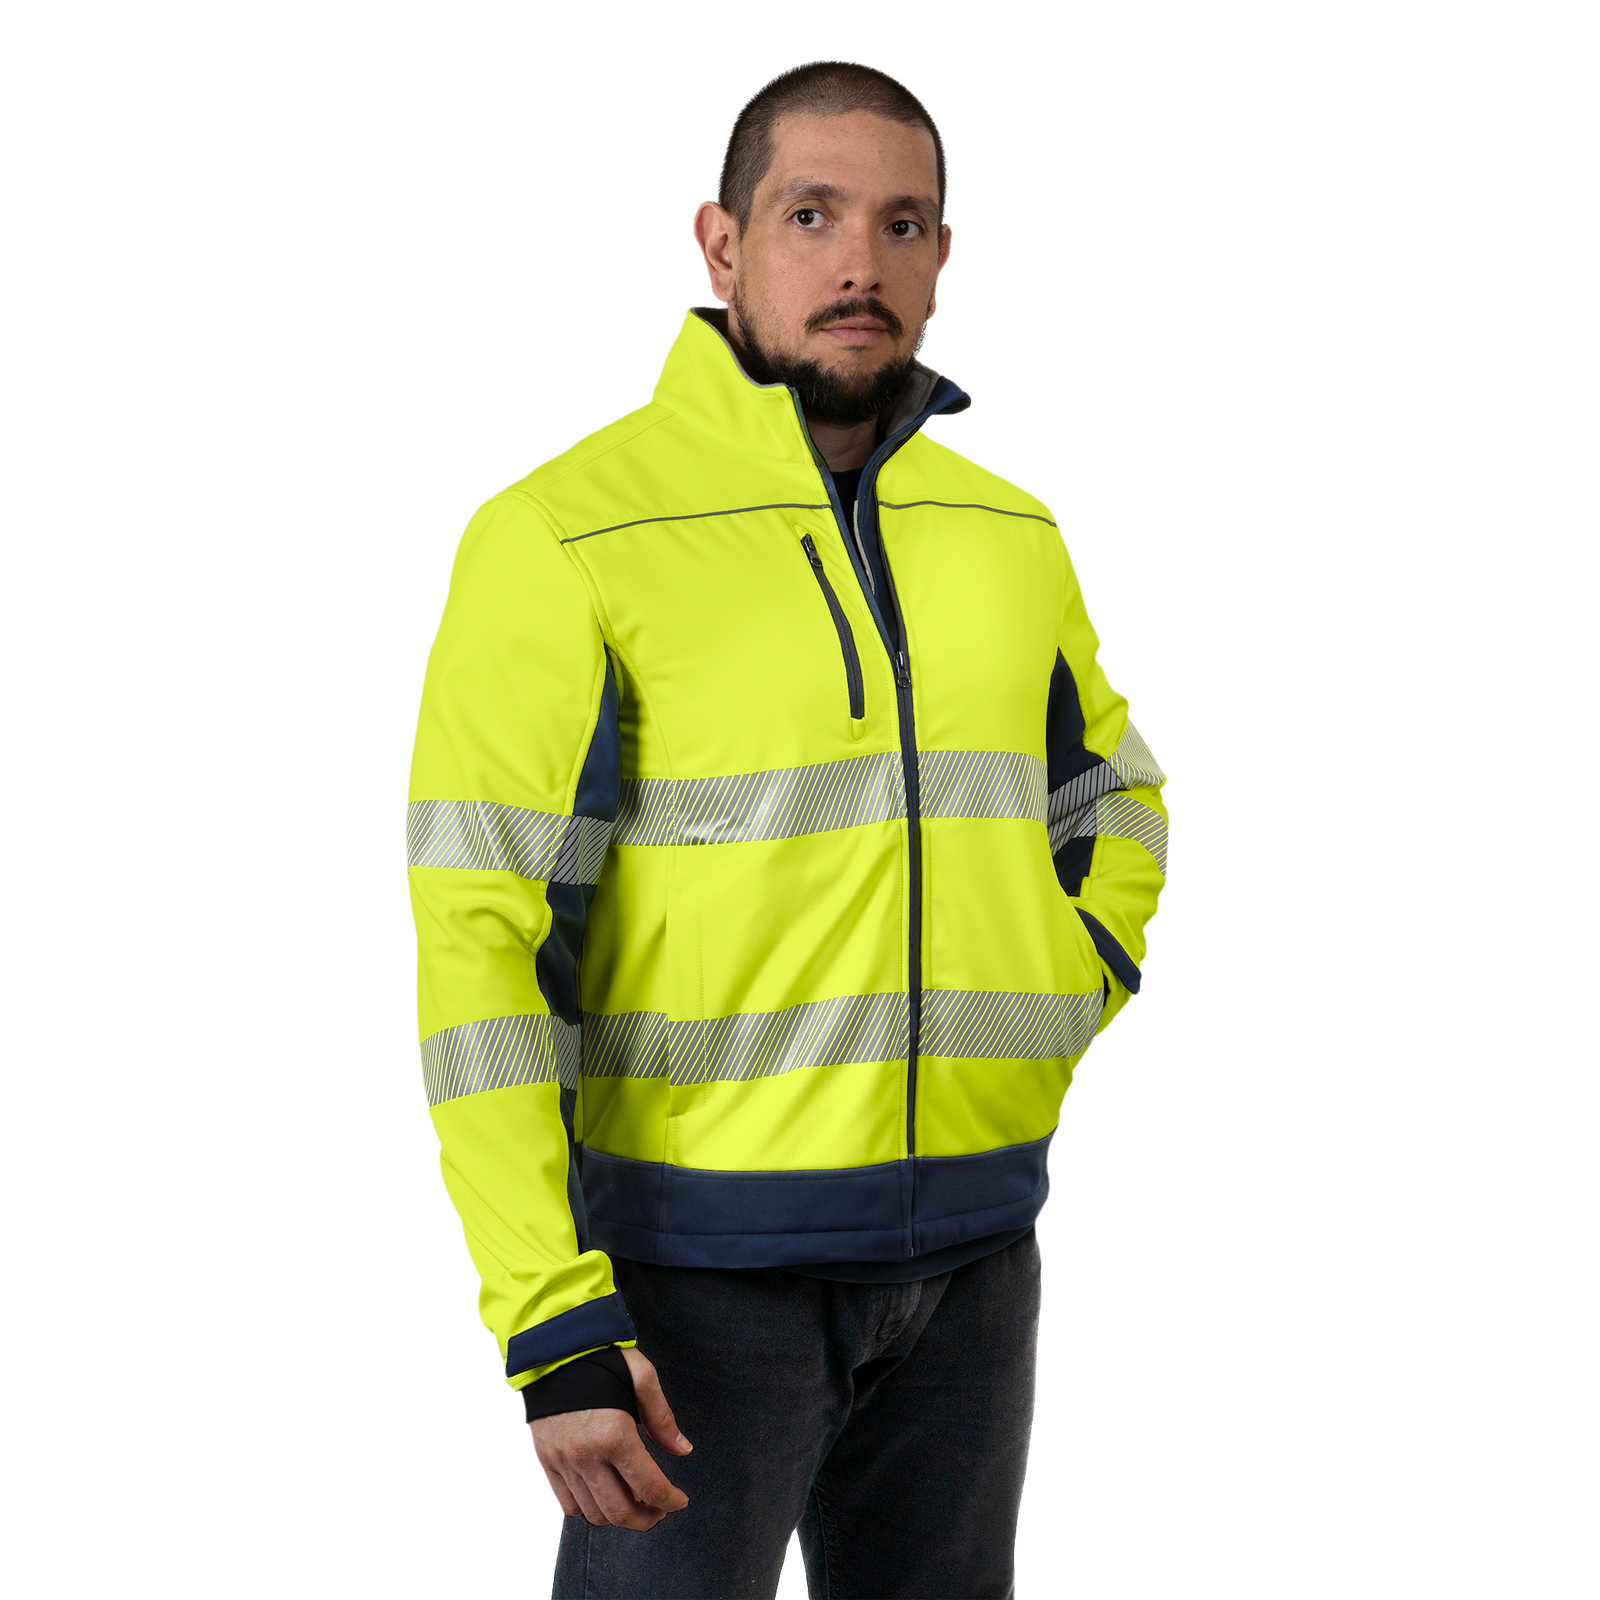 Worker wearing the all weather protection Hi Vis softshell waterproof fleece lined safety jacket with reflective strips by JORESTECH®